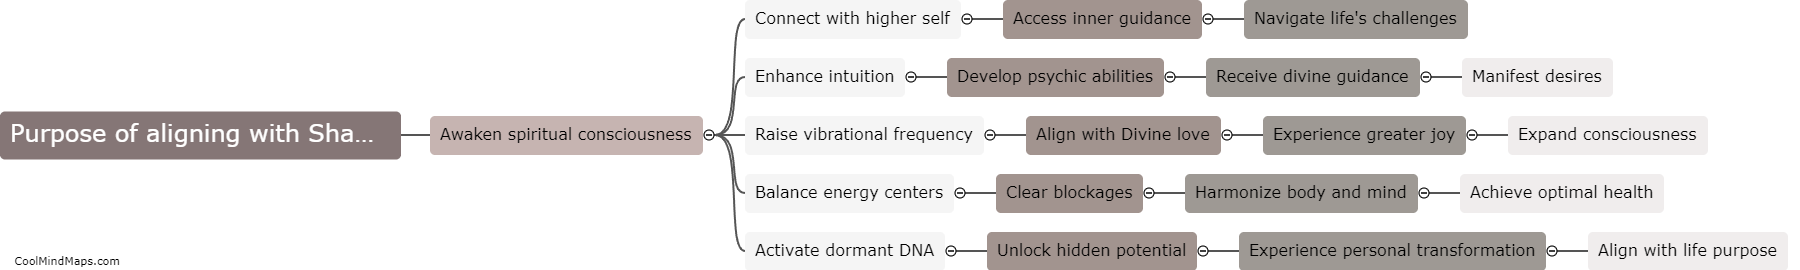 What is the purpose of aligning with Shamballa energy?